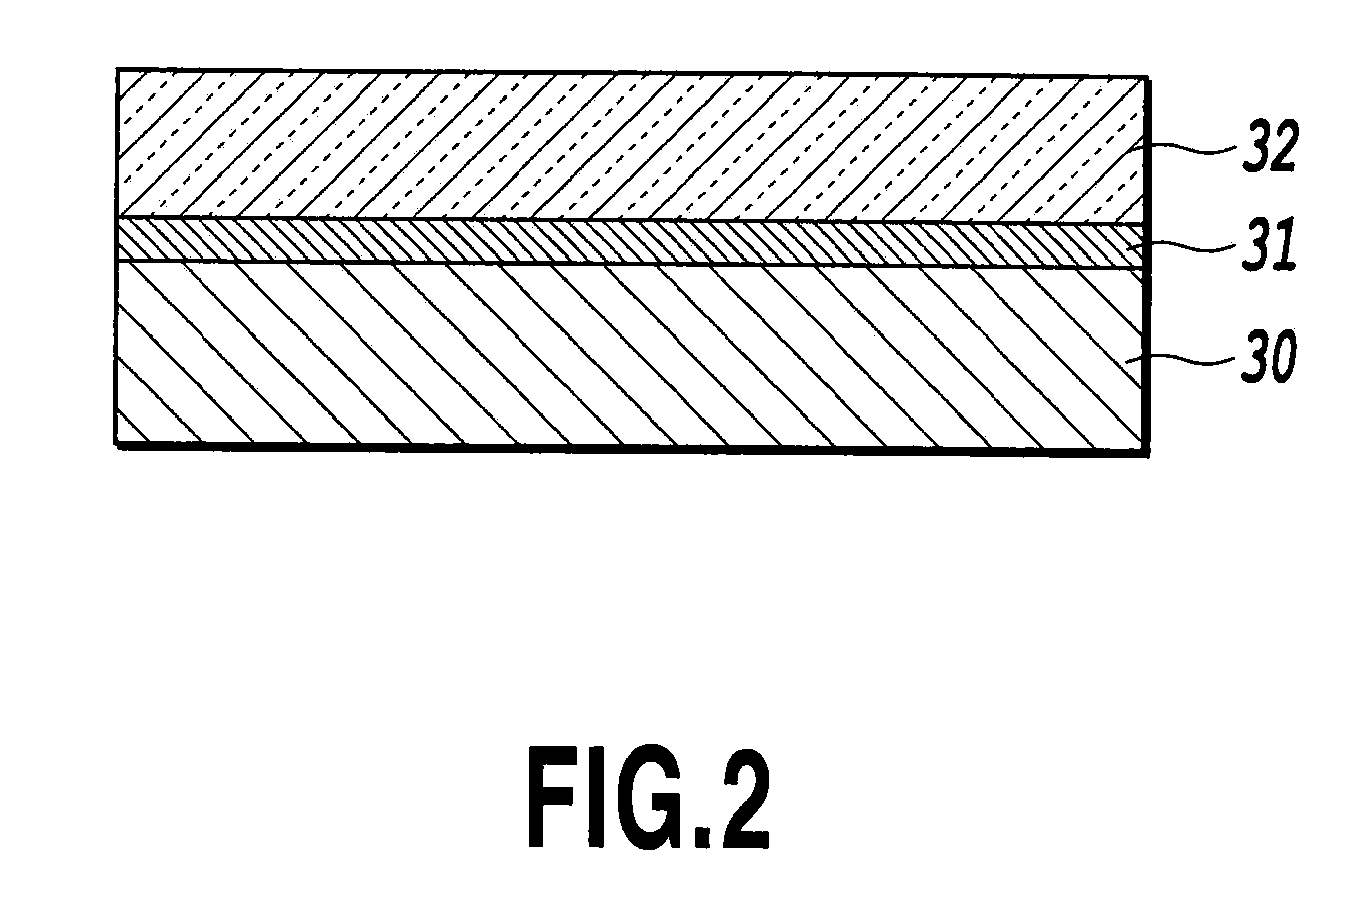 Chip for raman scattering enhancement and molecular sensing device including the chip